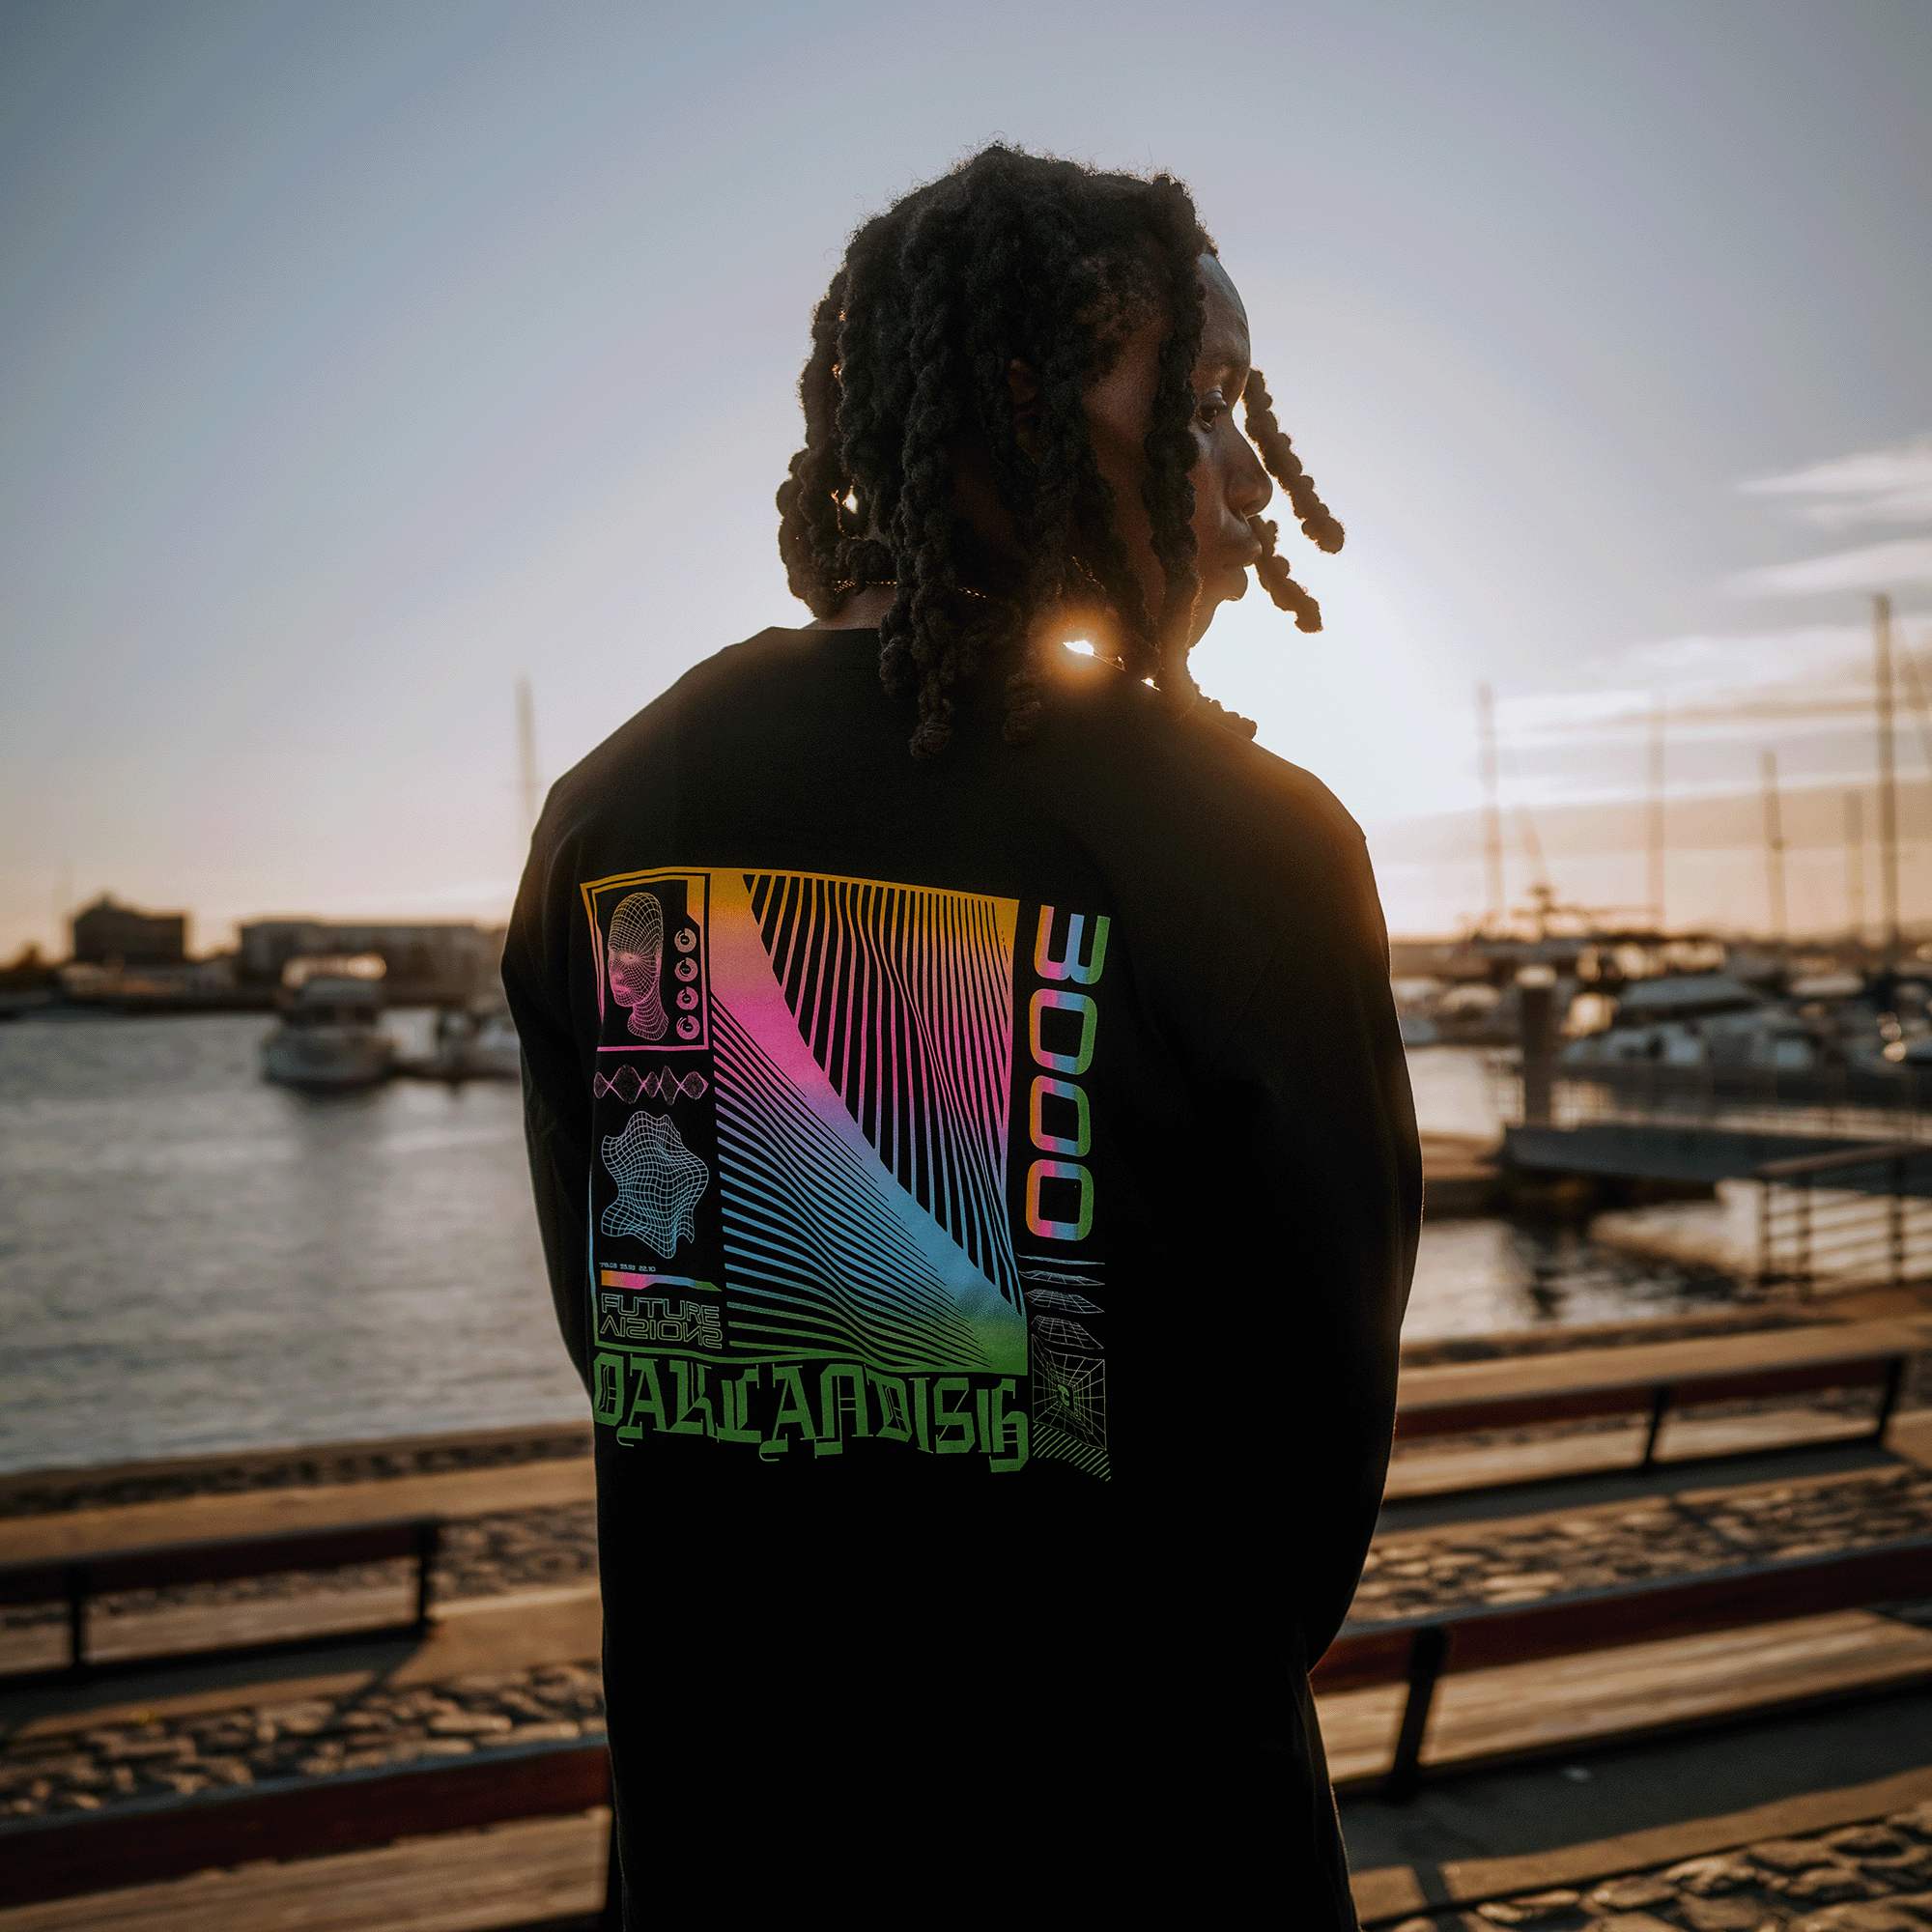 Backside view of model wearing black long-sleeve t-shirt with neon pink, yellow, blue, and green futuristic graphic with OAKLANDISH wordmark.